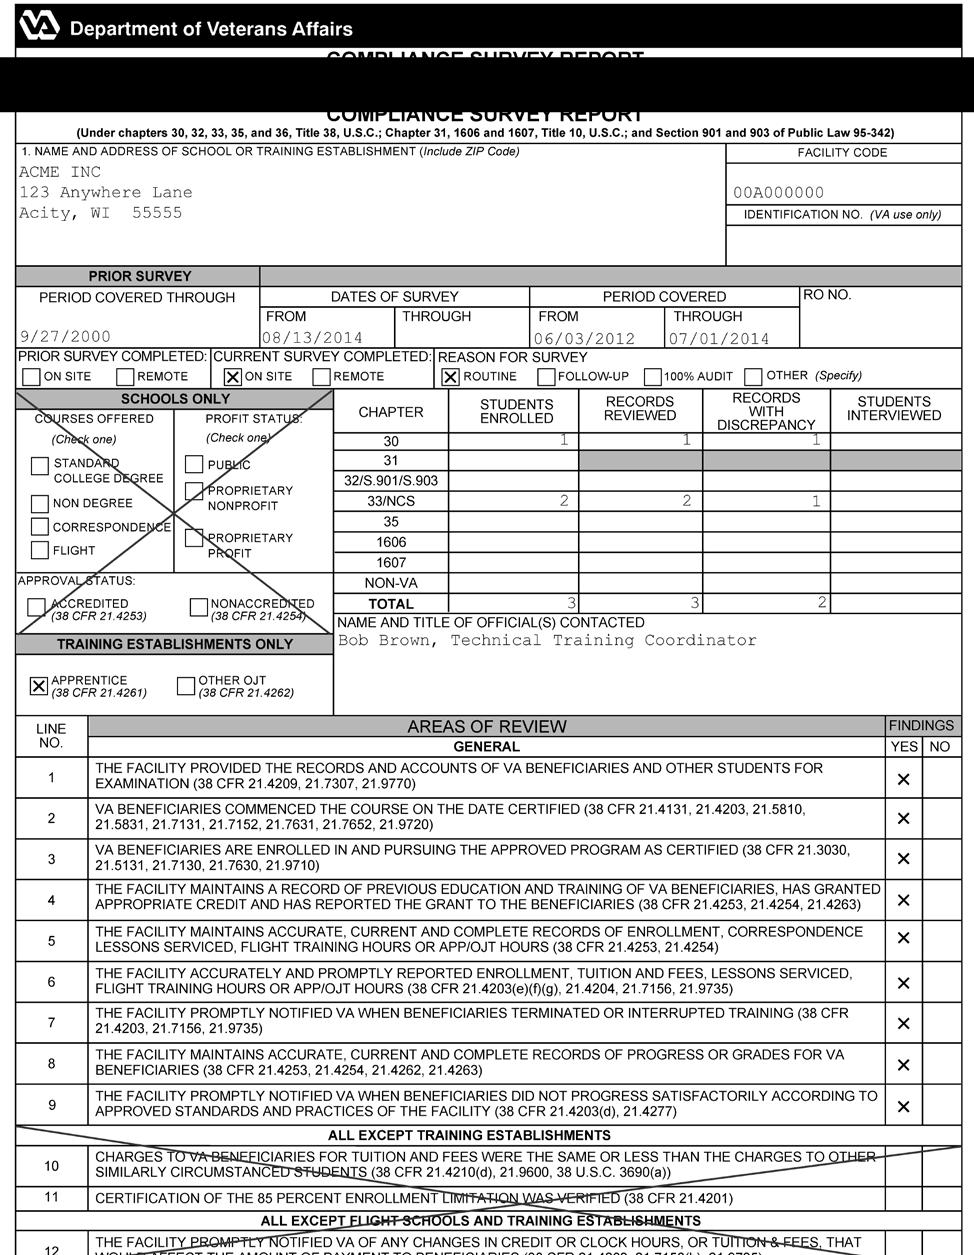 FORMS: Approved for the GI Bill VA Form